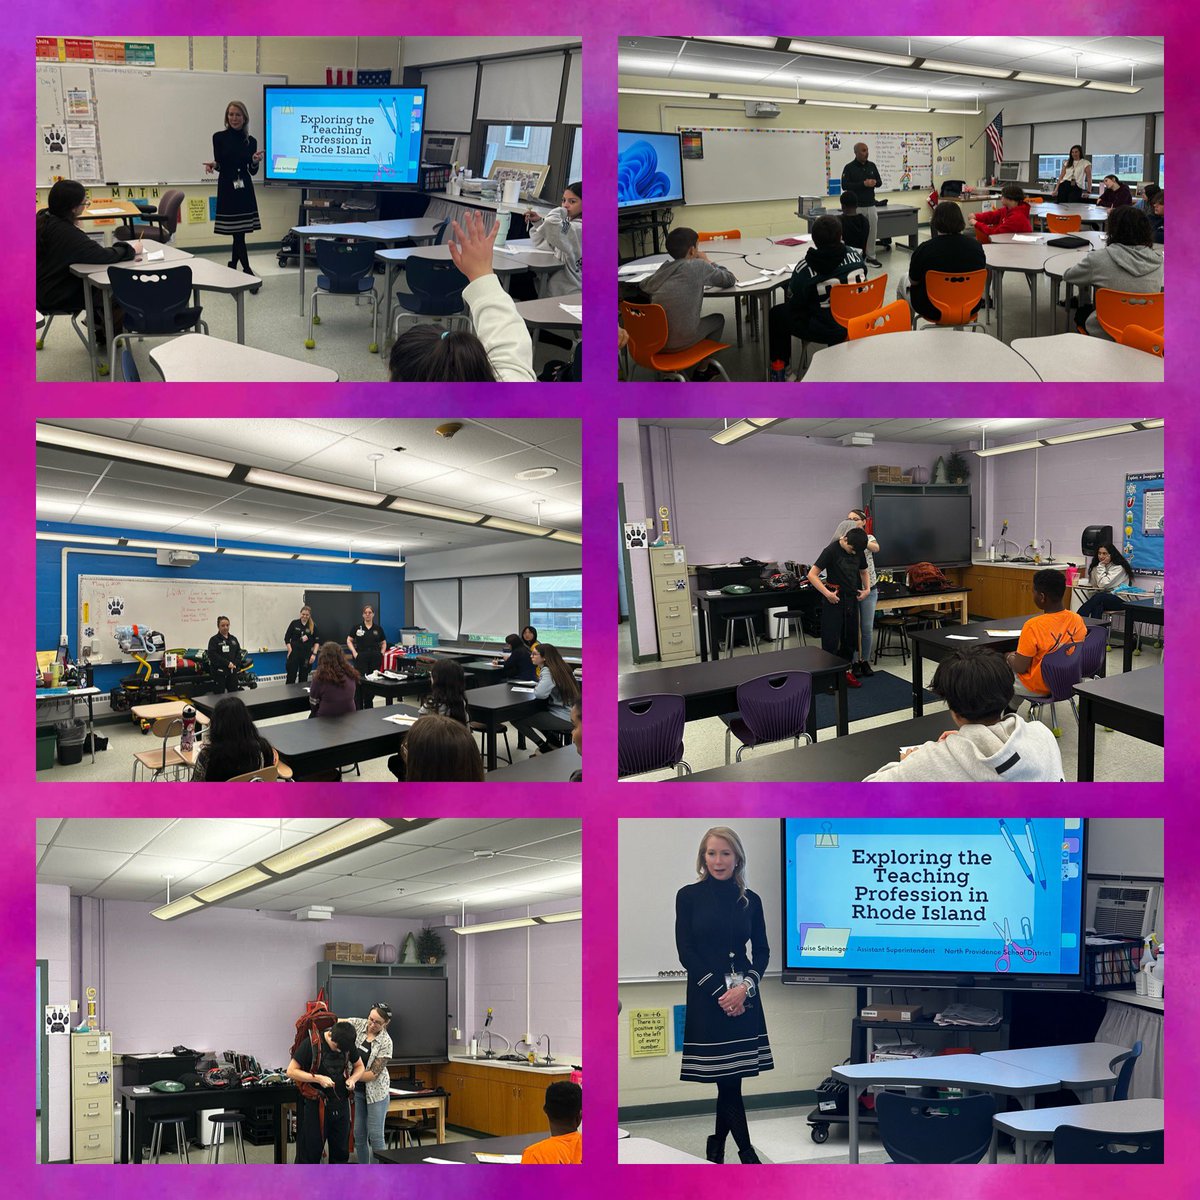 @npschoolsri @Bircwoodms What a tremendous Career Fair! Loved seeing all of the amazing presenters & loved presenting to our students about the Teaching Profession in RI! #npsdlearns #nsdpride 😊🩷👏 @joegoho @RIDeptEd